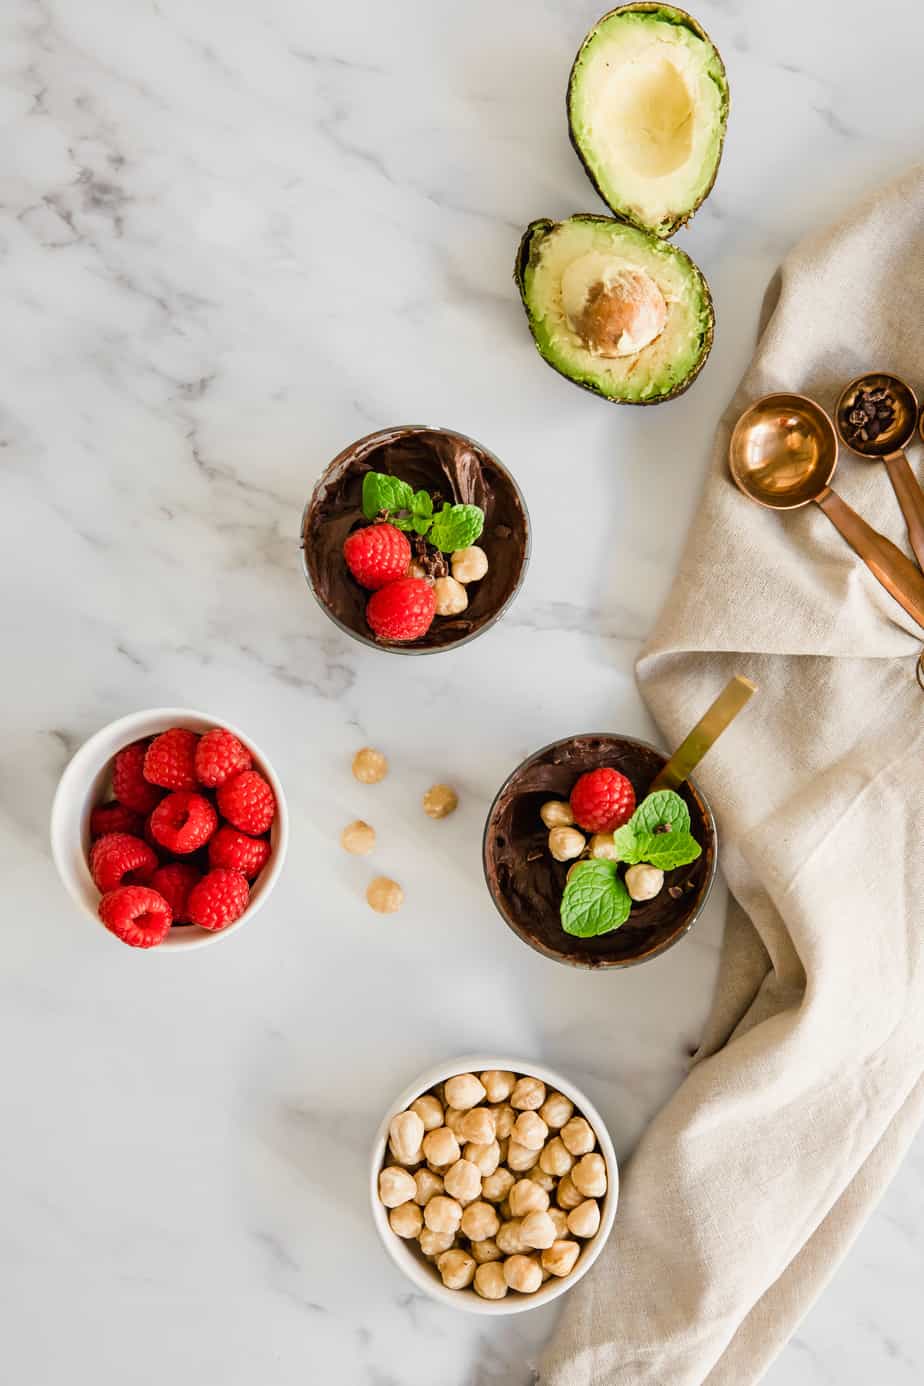 Chocolate mousse with avocados and raspberries on marble.